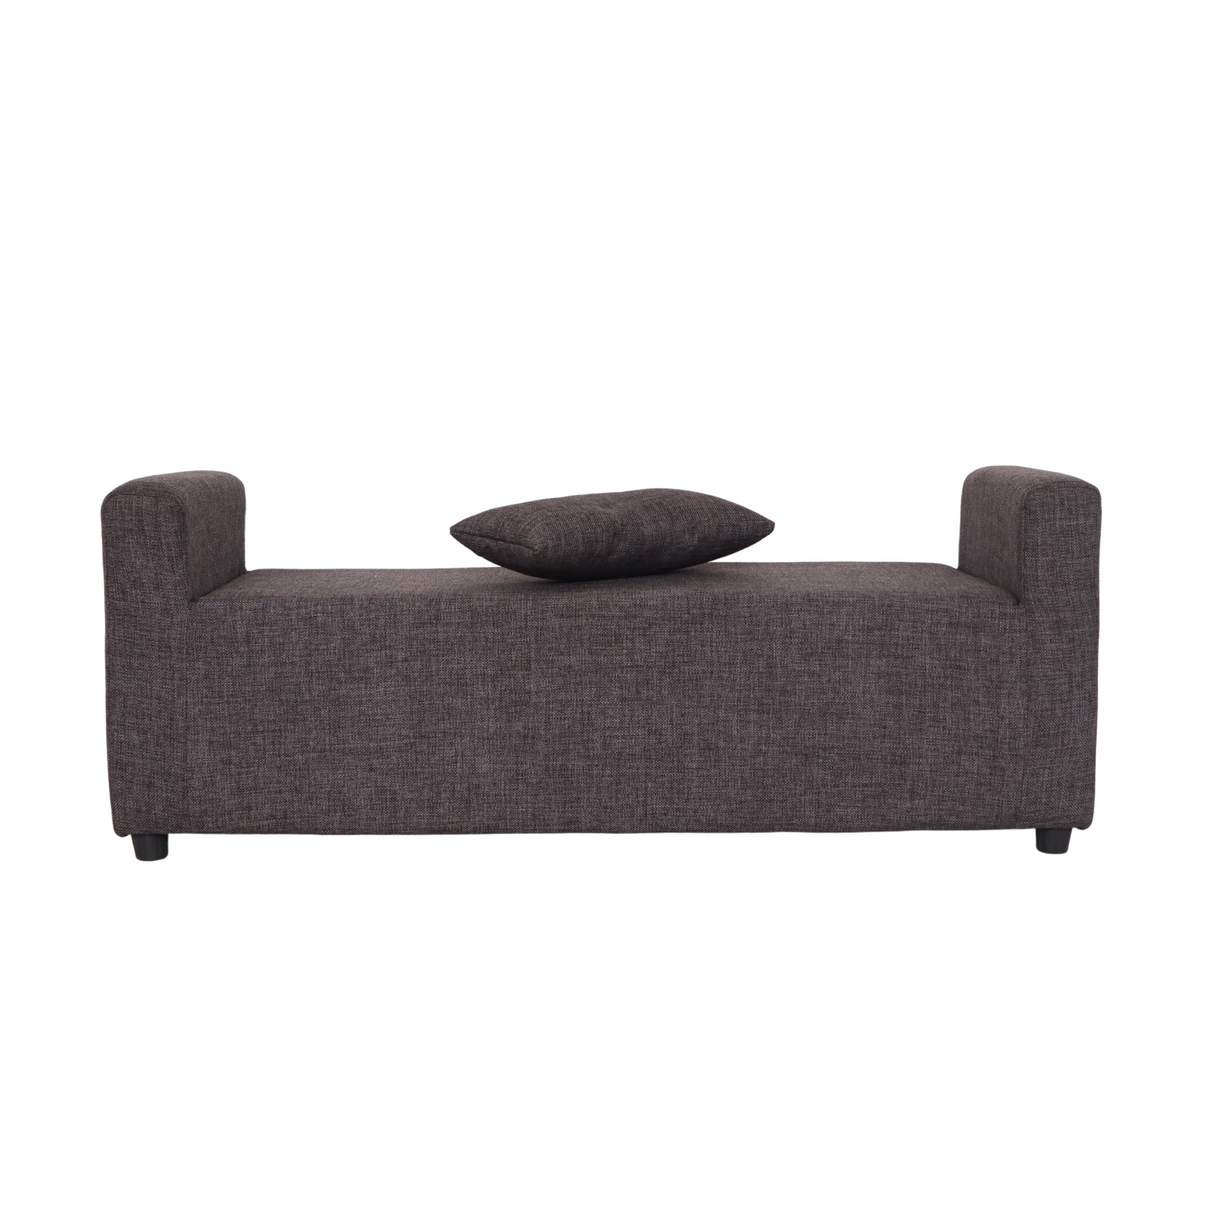 FALCON 2 Seater Bench (Leather Sofa) Affordahome